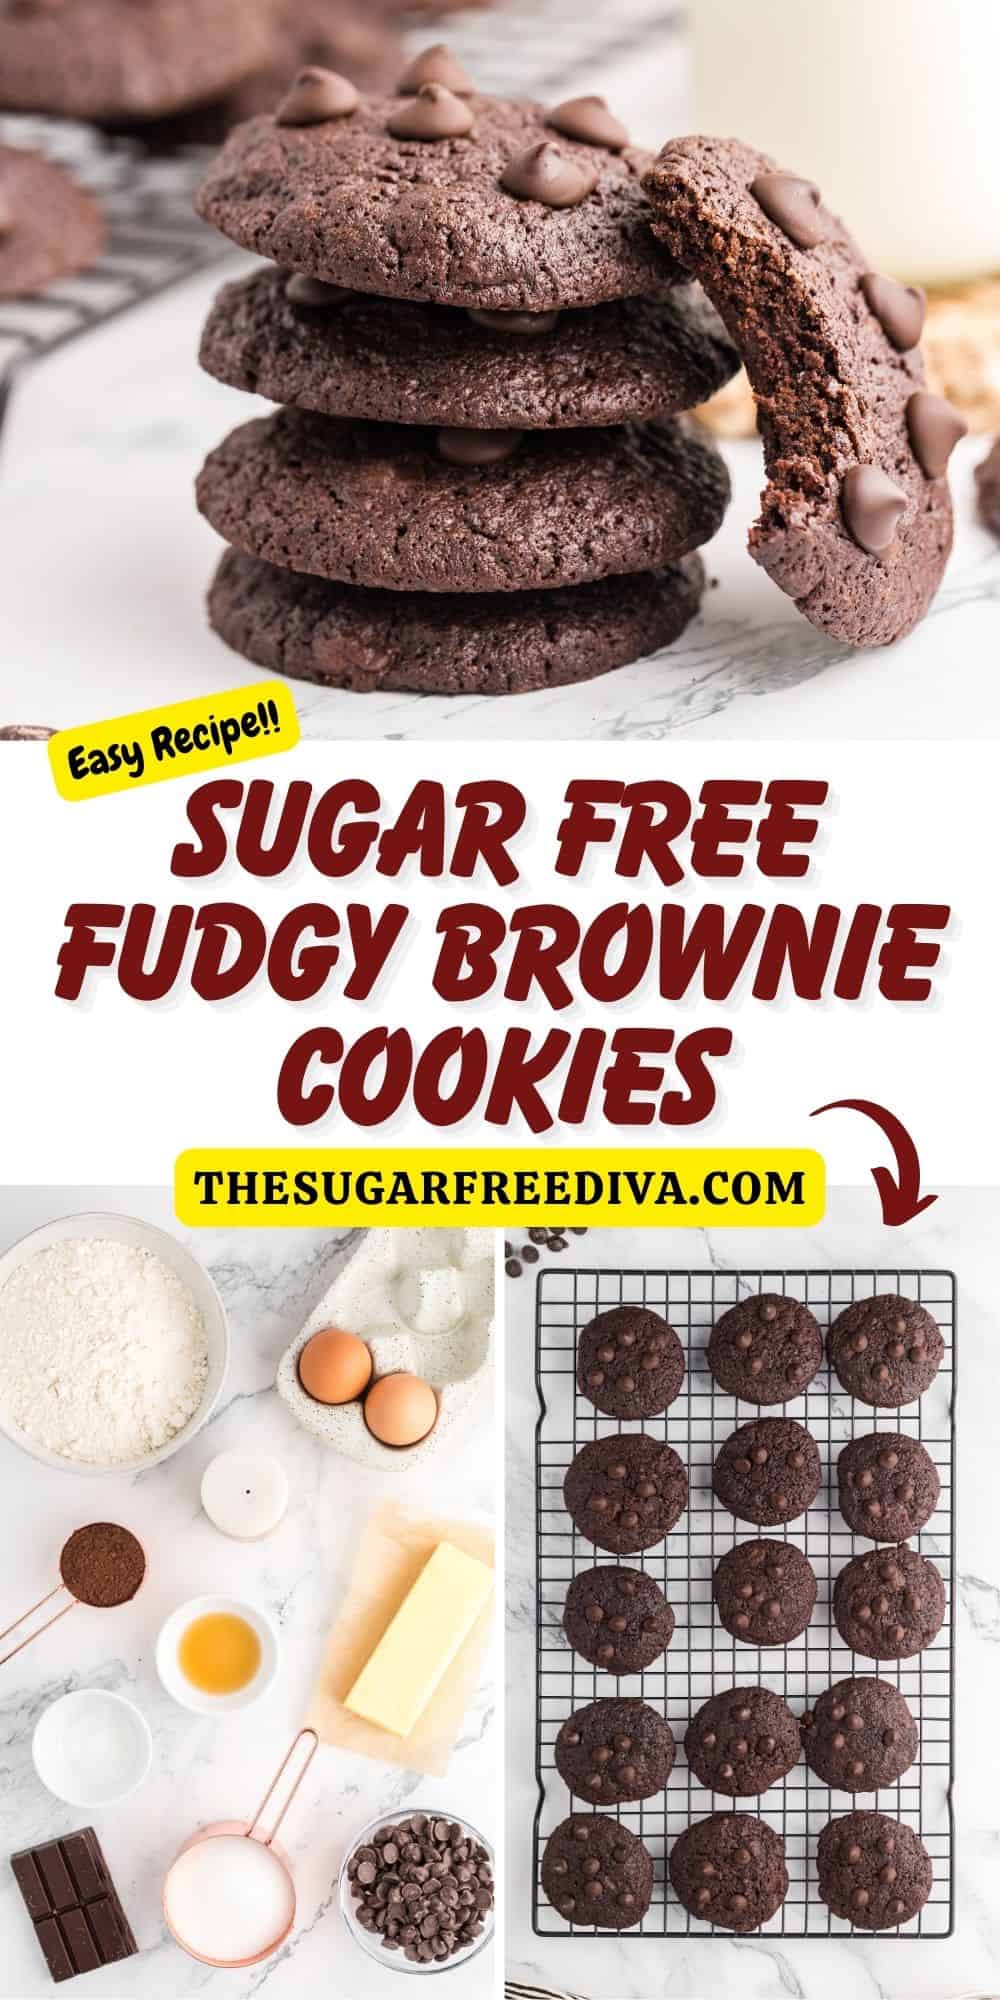 Sugar Free Fudgy Brownie Cookies, a simple and delicious dessert recipe featuring a rich chocolate taste with a fudgy texture. No Added Sugar